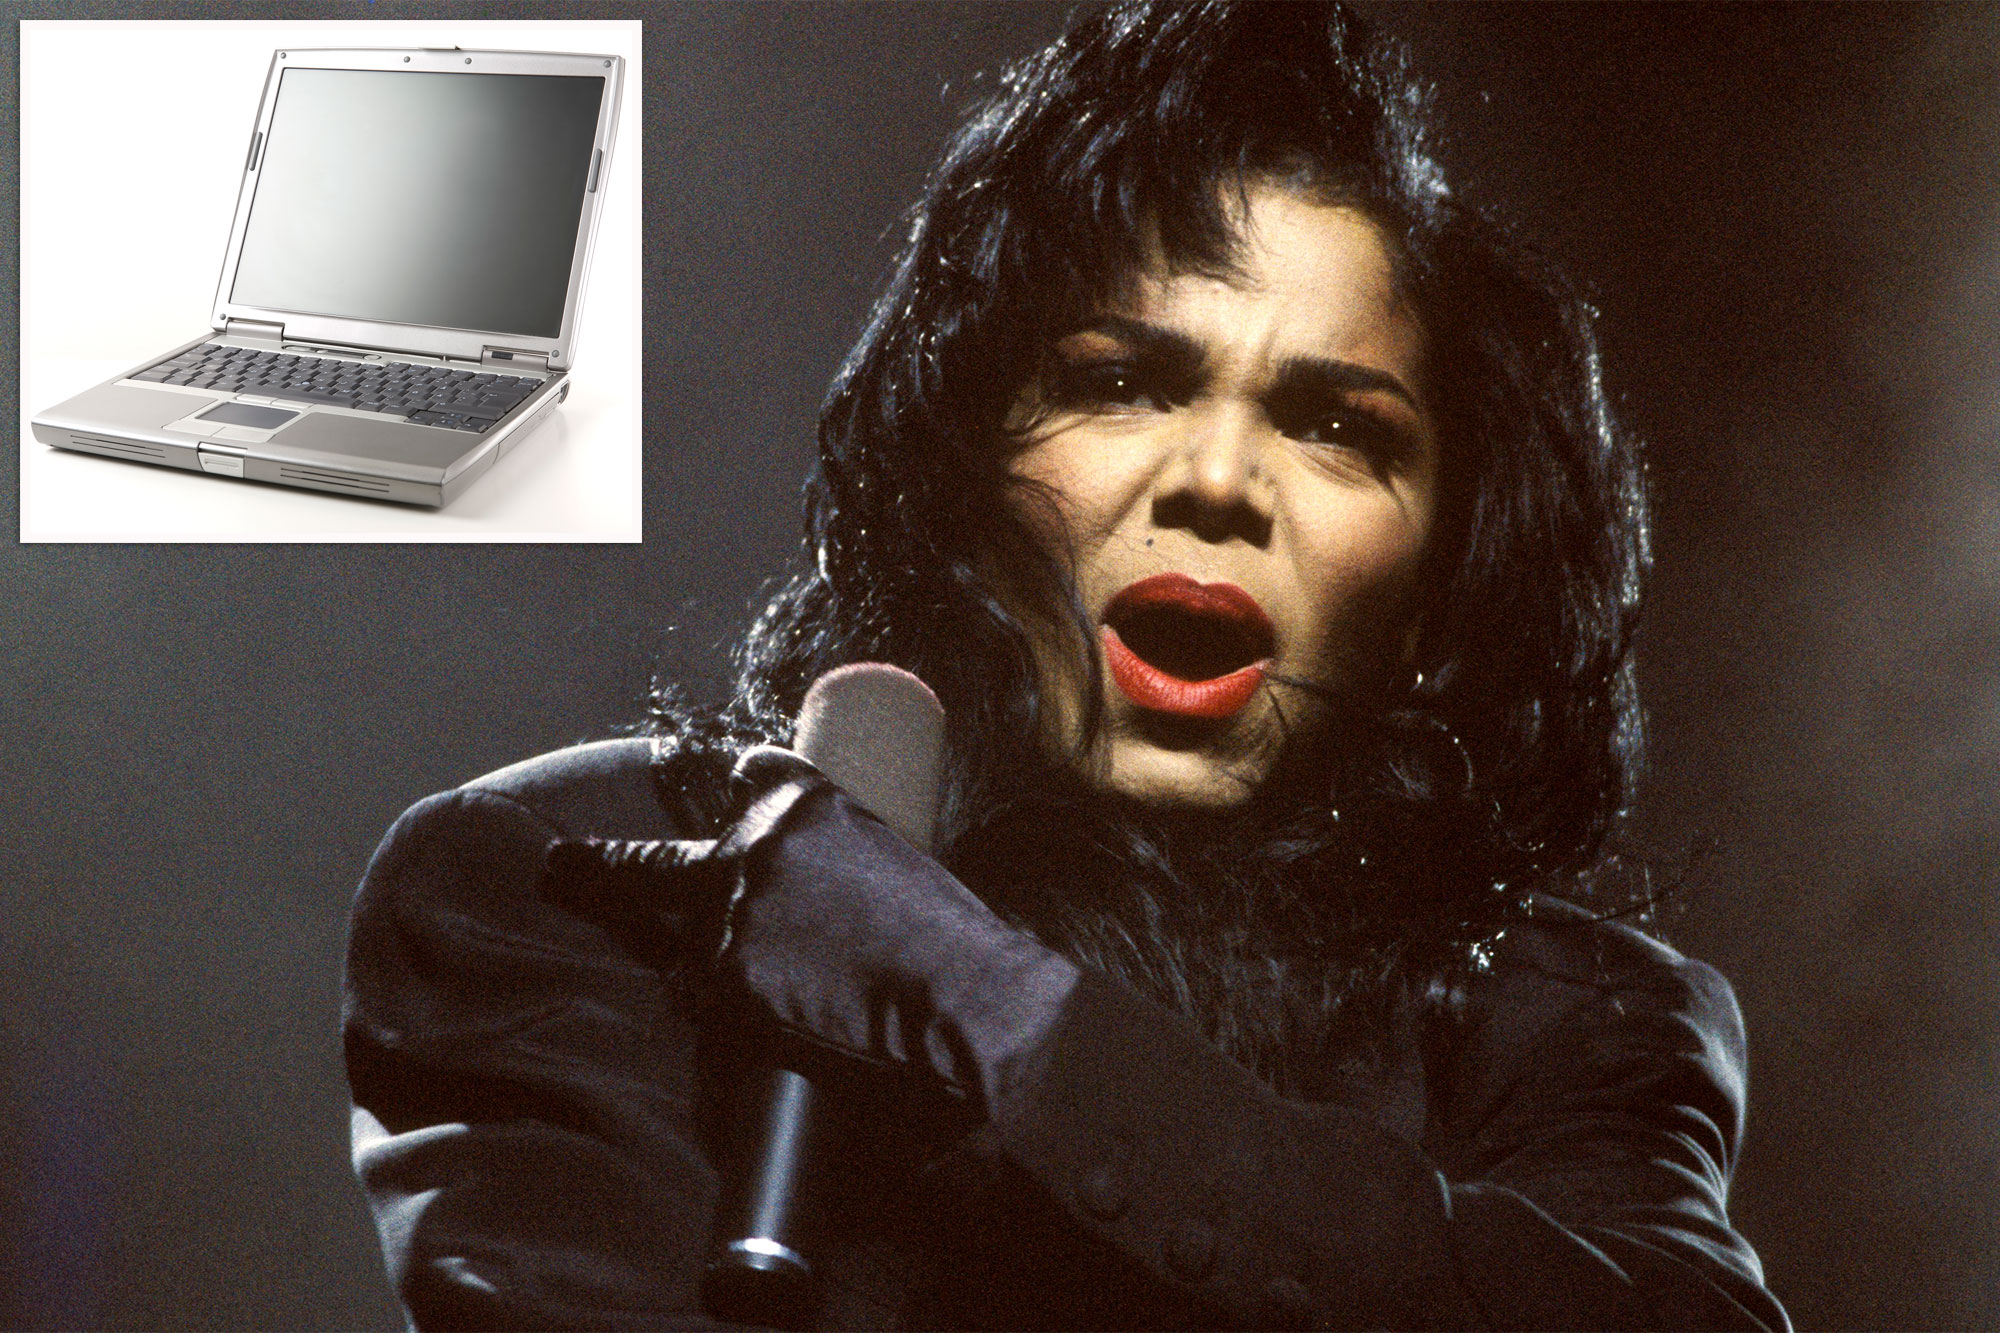 Older laptops may not be Janet Jackson fans.